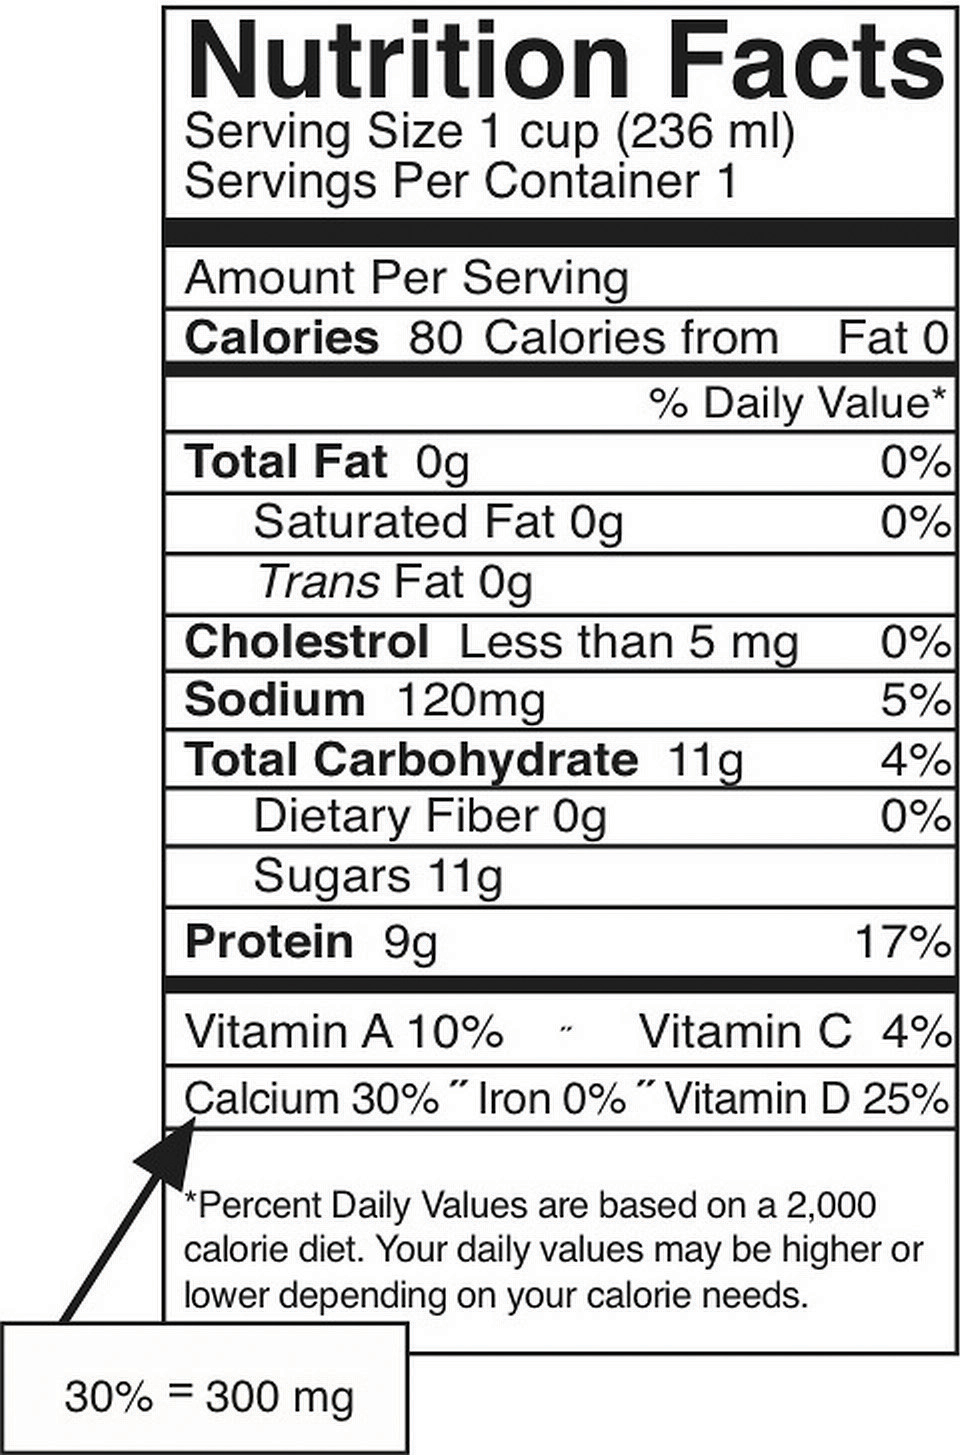 Essentials Of Nutrition A Functional Approach 101 Flatworld intended for The Most Awesome  nutrition facts vitamin d intended for  Household